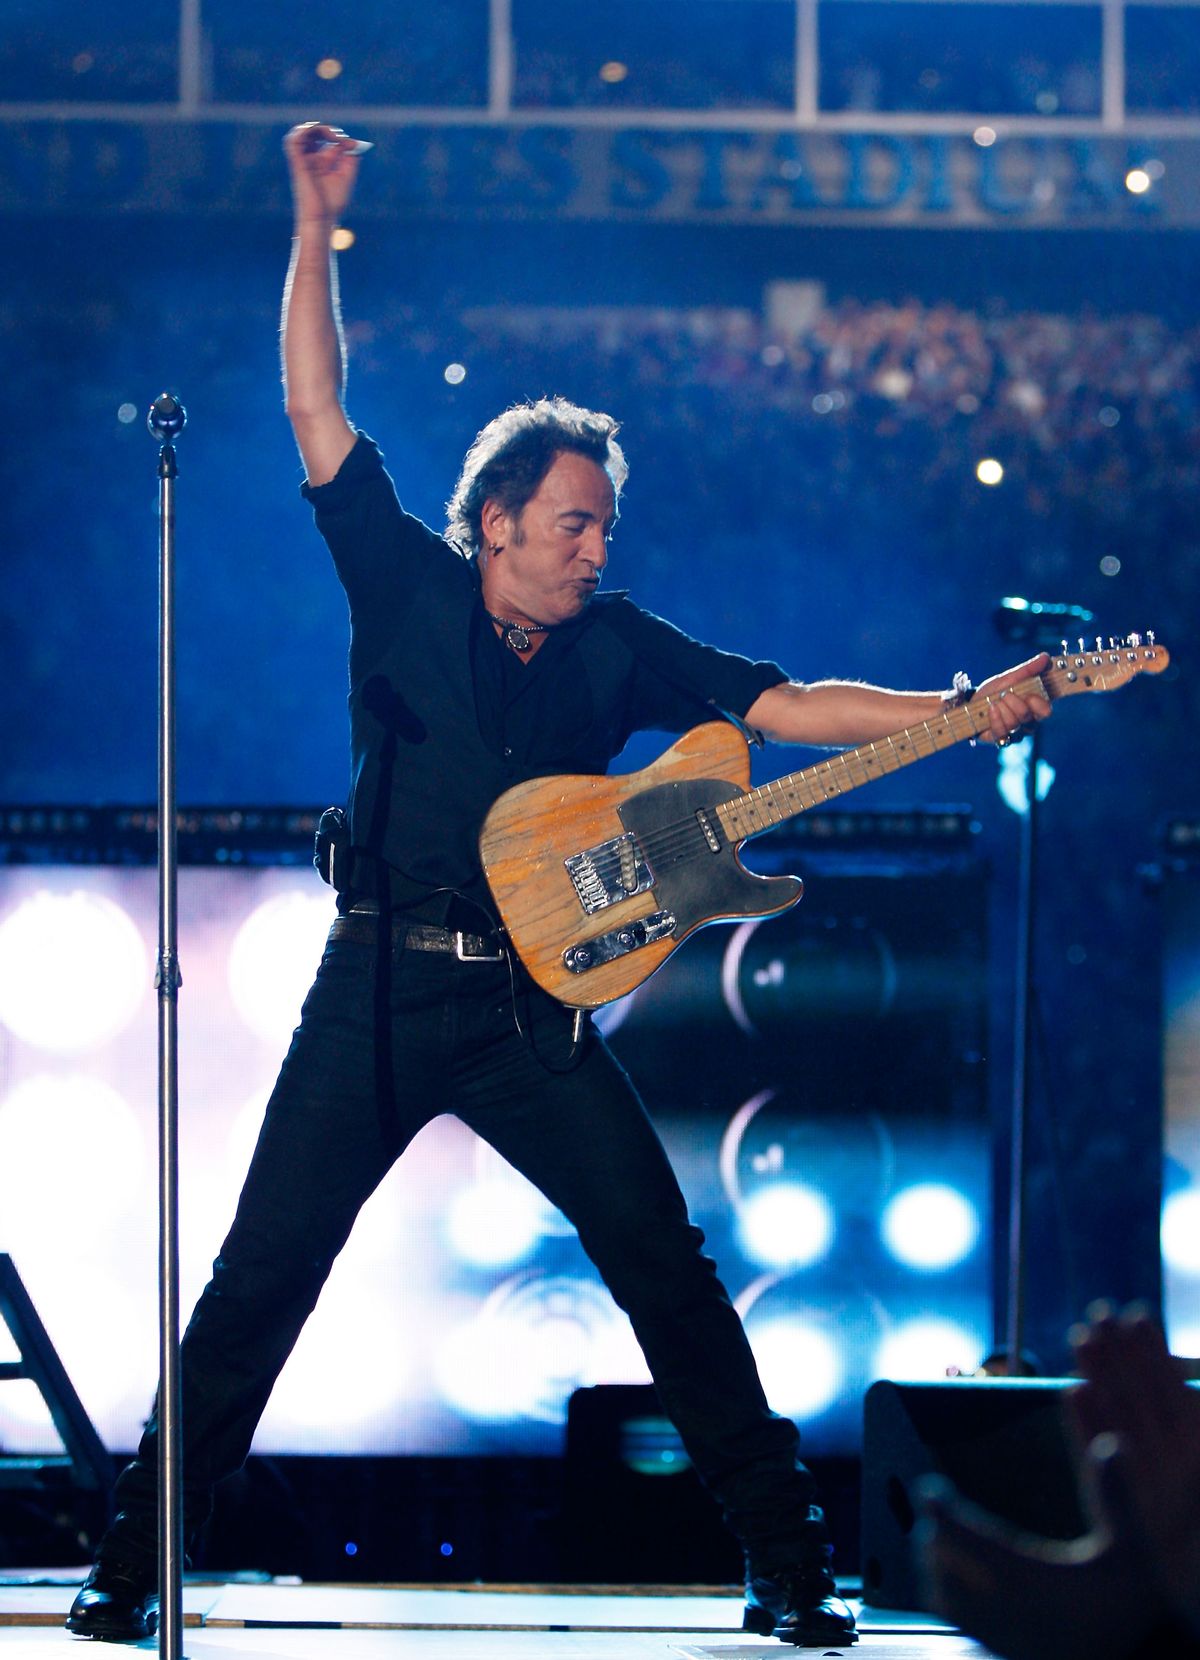 Musician Bruce Springsteen and the E Street Band  perform at the Bridgestone halftime show during Super Bowl XLIII between the Arizona Cardinals and the Pittsburgh Steelers on February 1, 2009 at Raymond James Stadium in Tampa, Florida. (Jamie Squire)